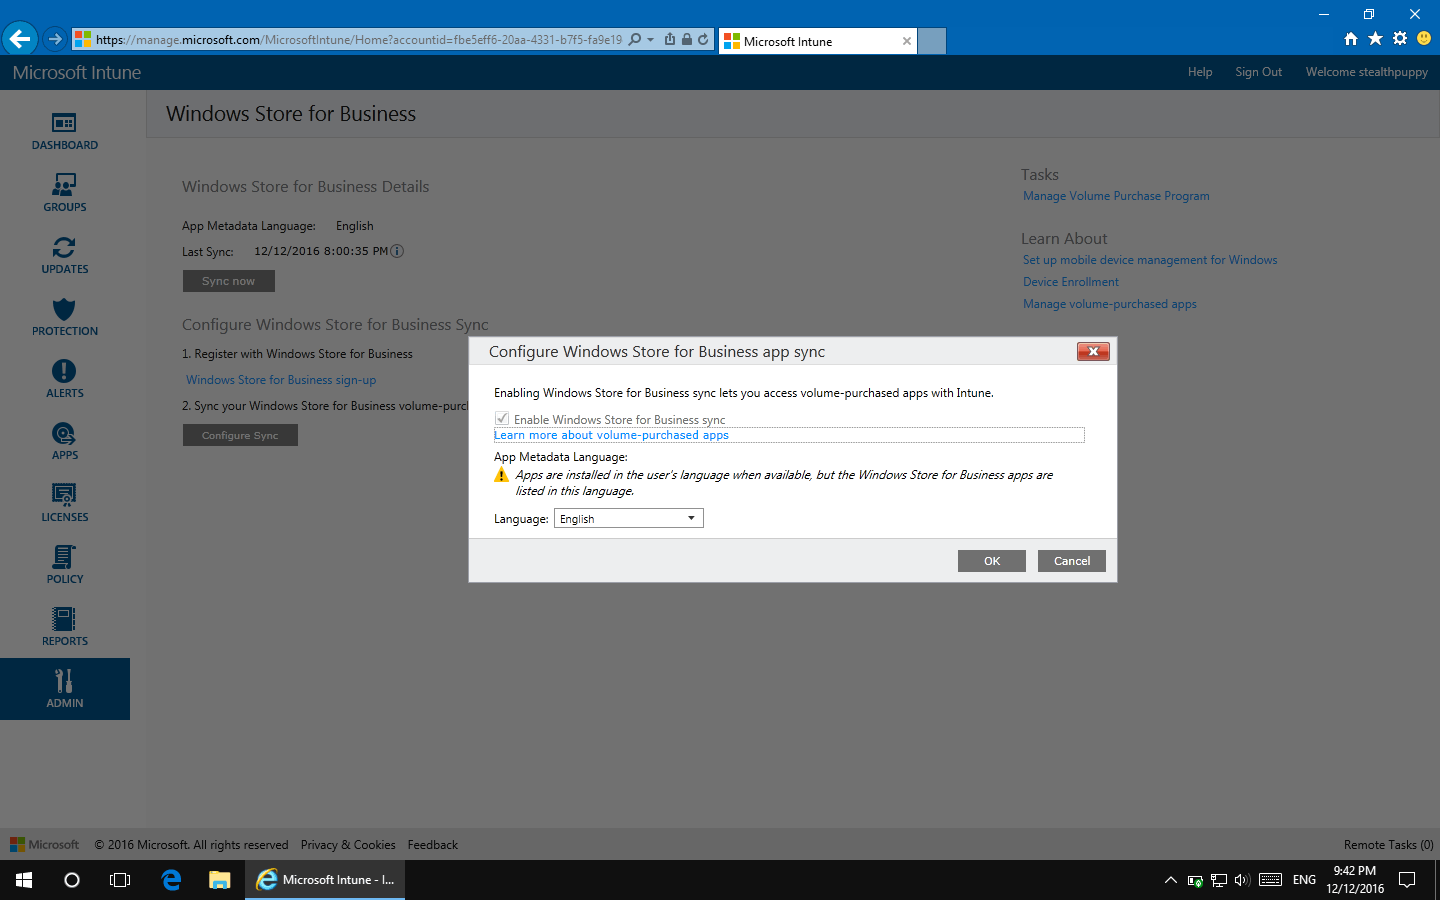 Configuring Windows Store for Business app sync in the Intune console